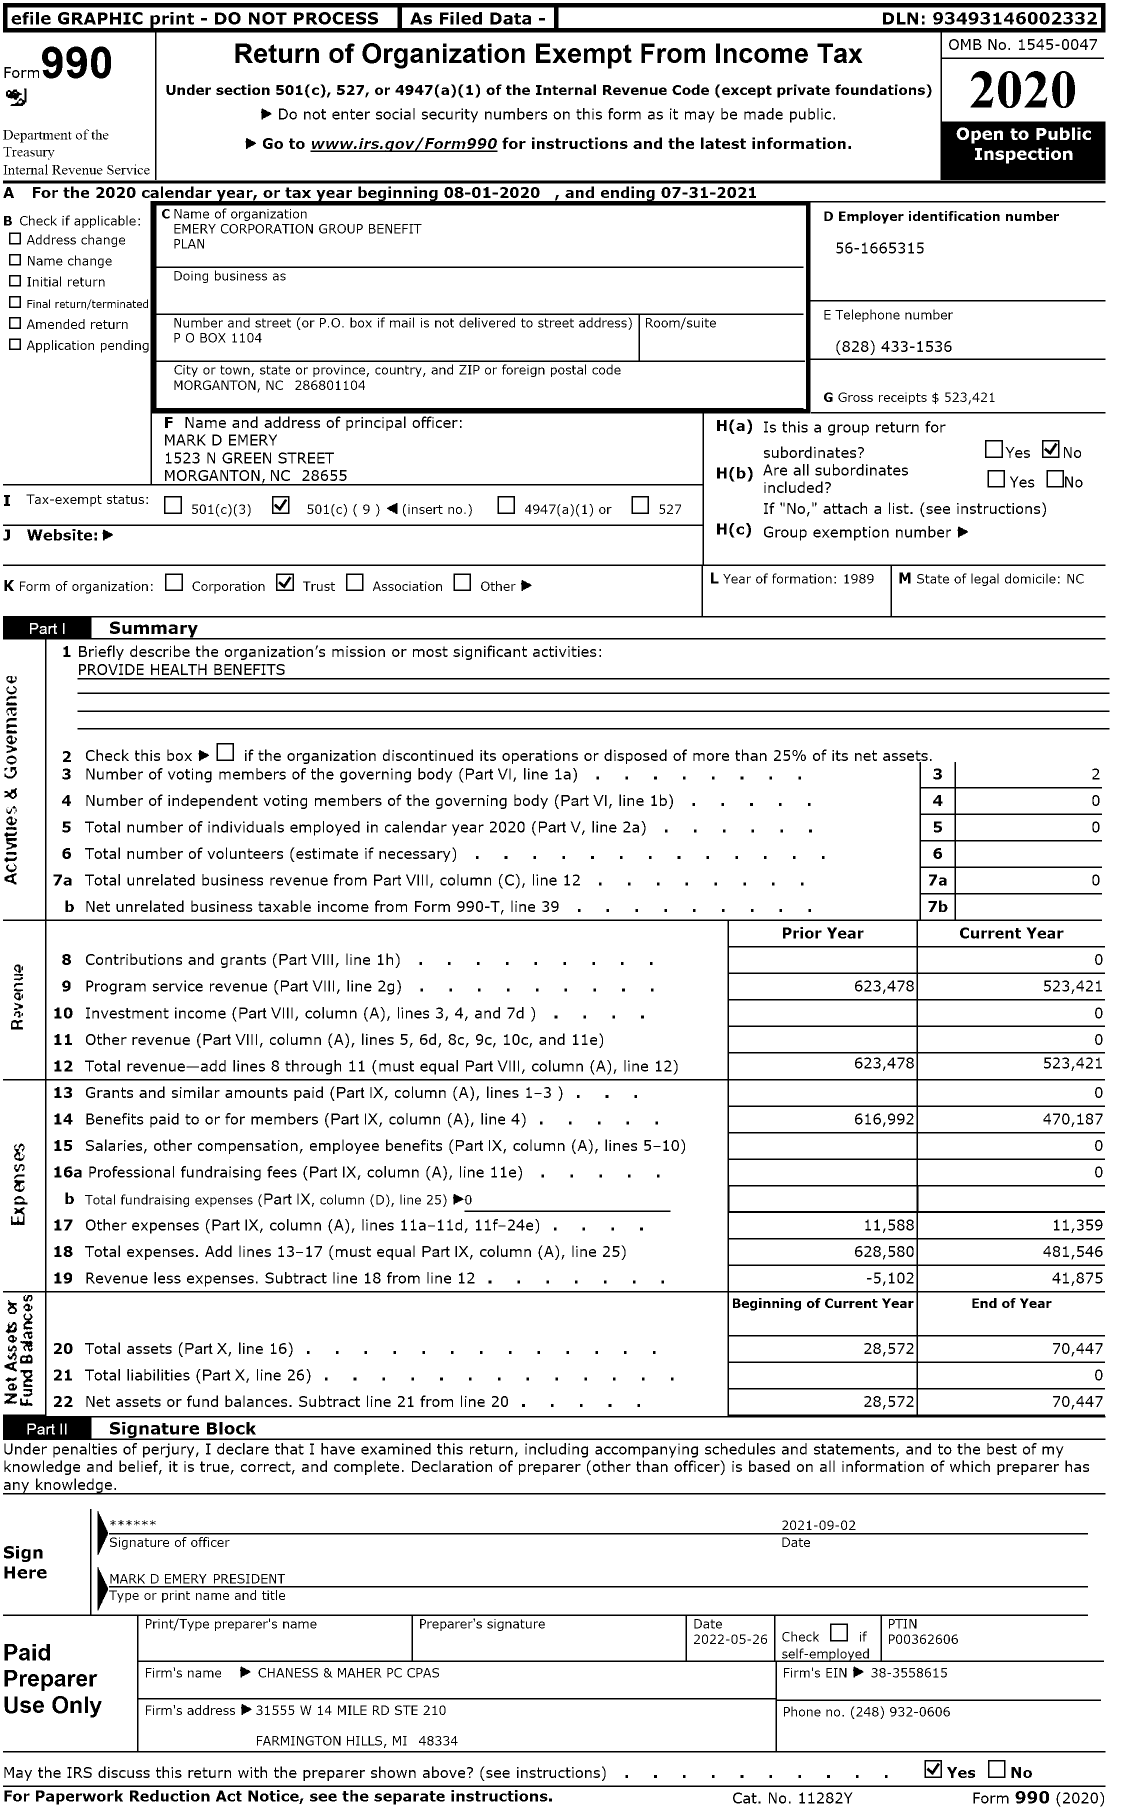 Image of first page of 2020 Form 990O for Emery Corporation Group Benefit Plan